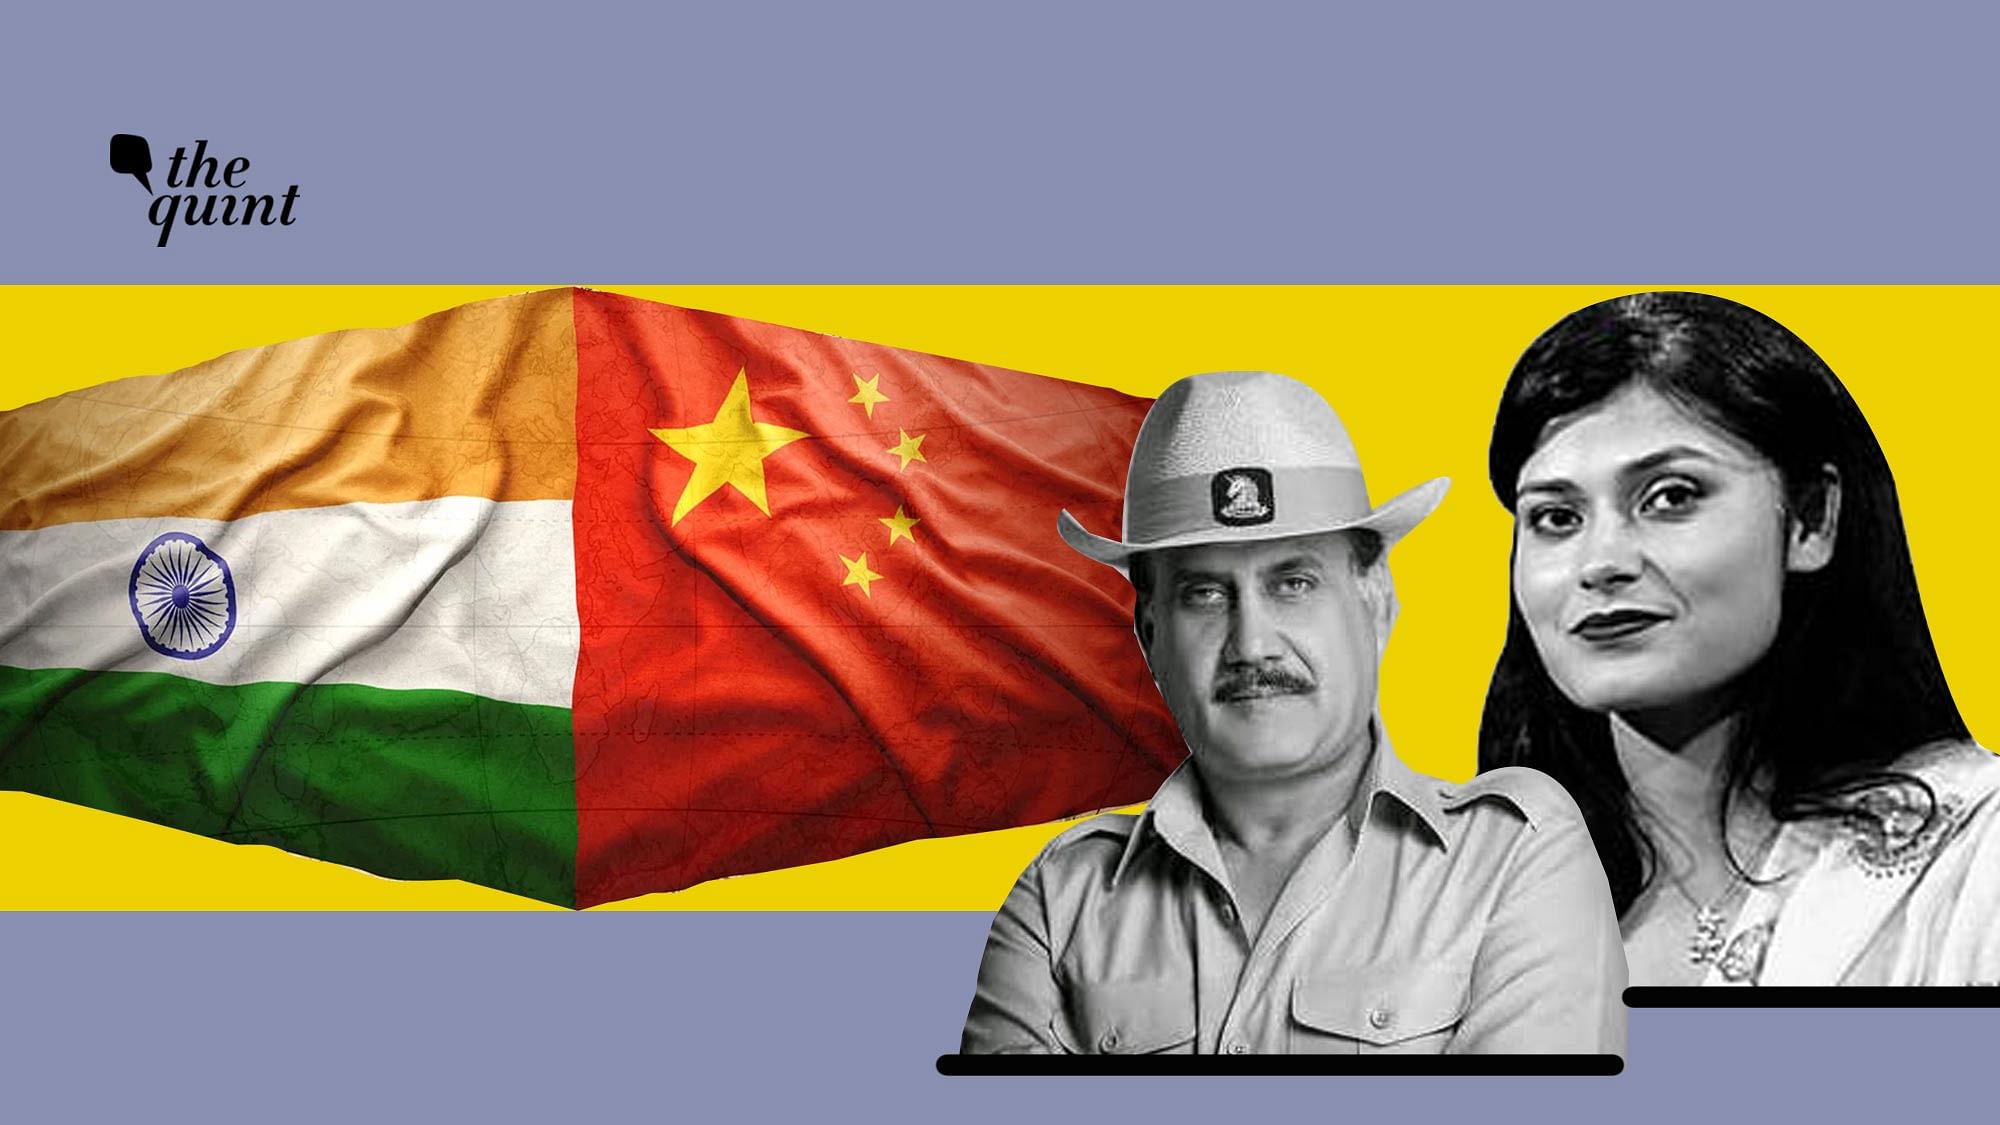 Image of Lt Gen (Retd) AK Singh (L) and Nishtha Gautam, Senior Editor, Opinions, The Quint, used for representational purposes, along side flags of India &amp; China.